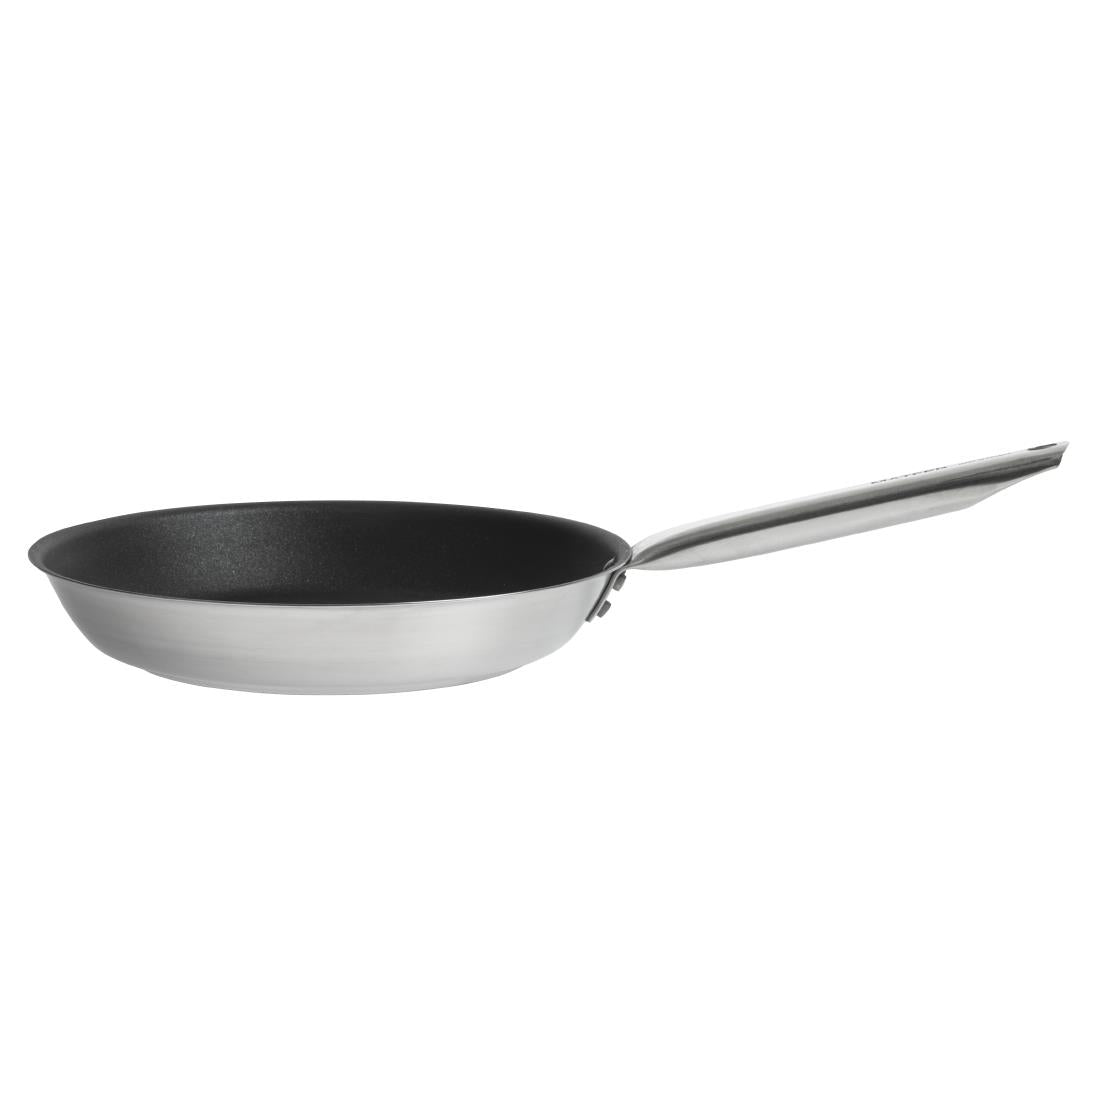 CX539 Matfer Bourgeat Tradition Pro Non-Stick Frying Pan 24cm JD Catering Equipment Solutions Ltd